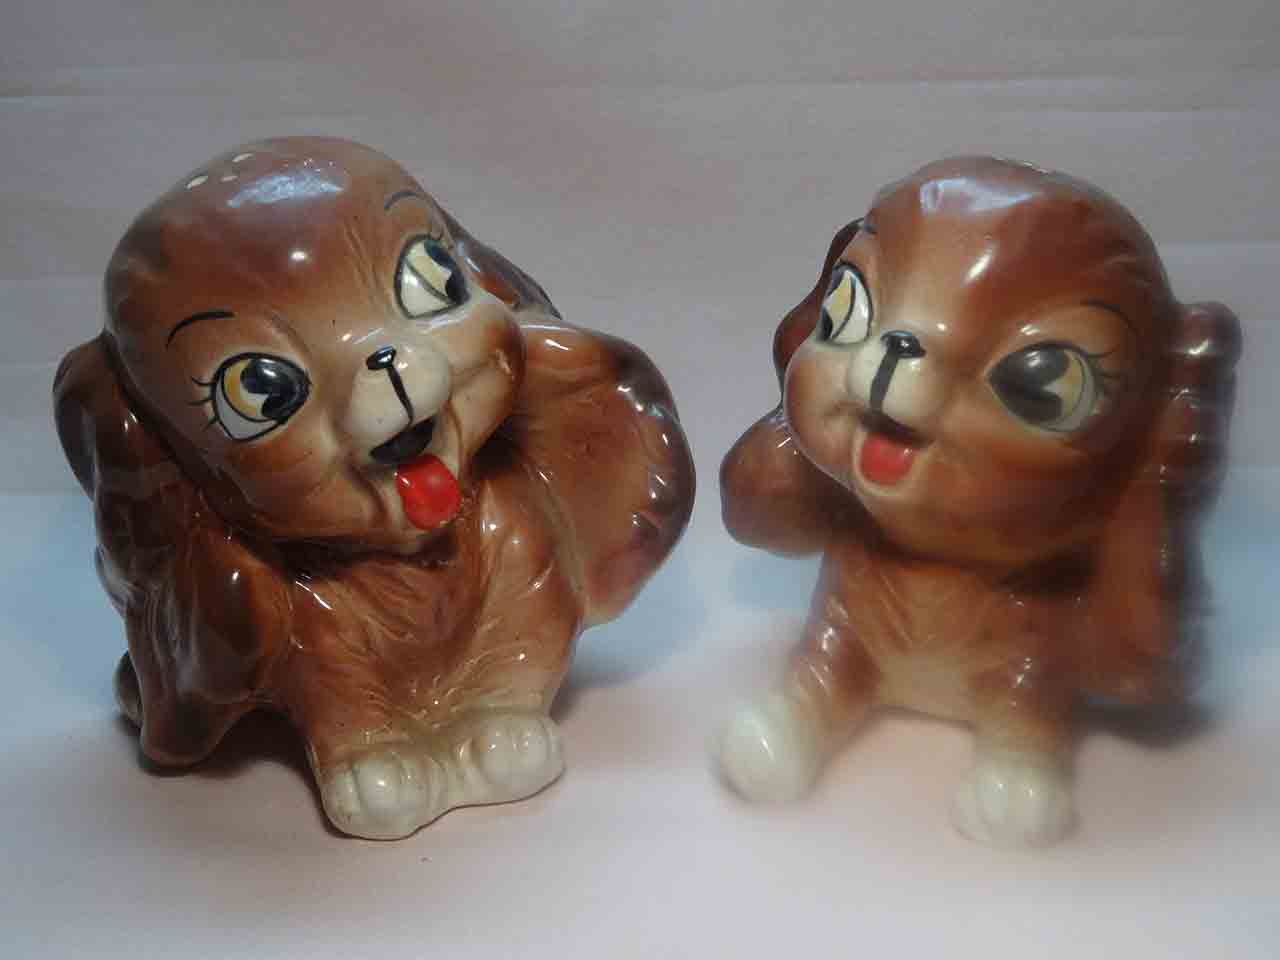 Kreiss animals salt and pepper shakers - large dogs